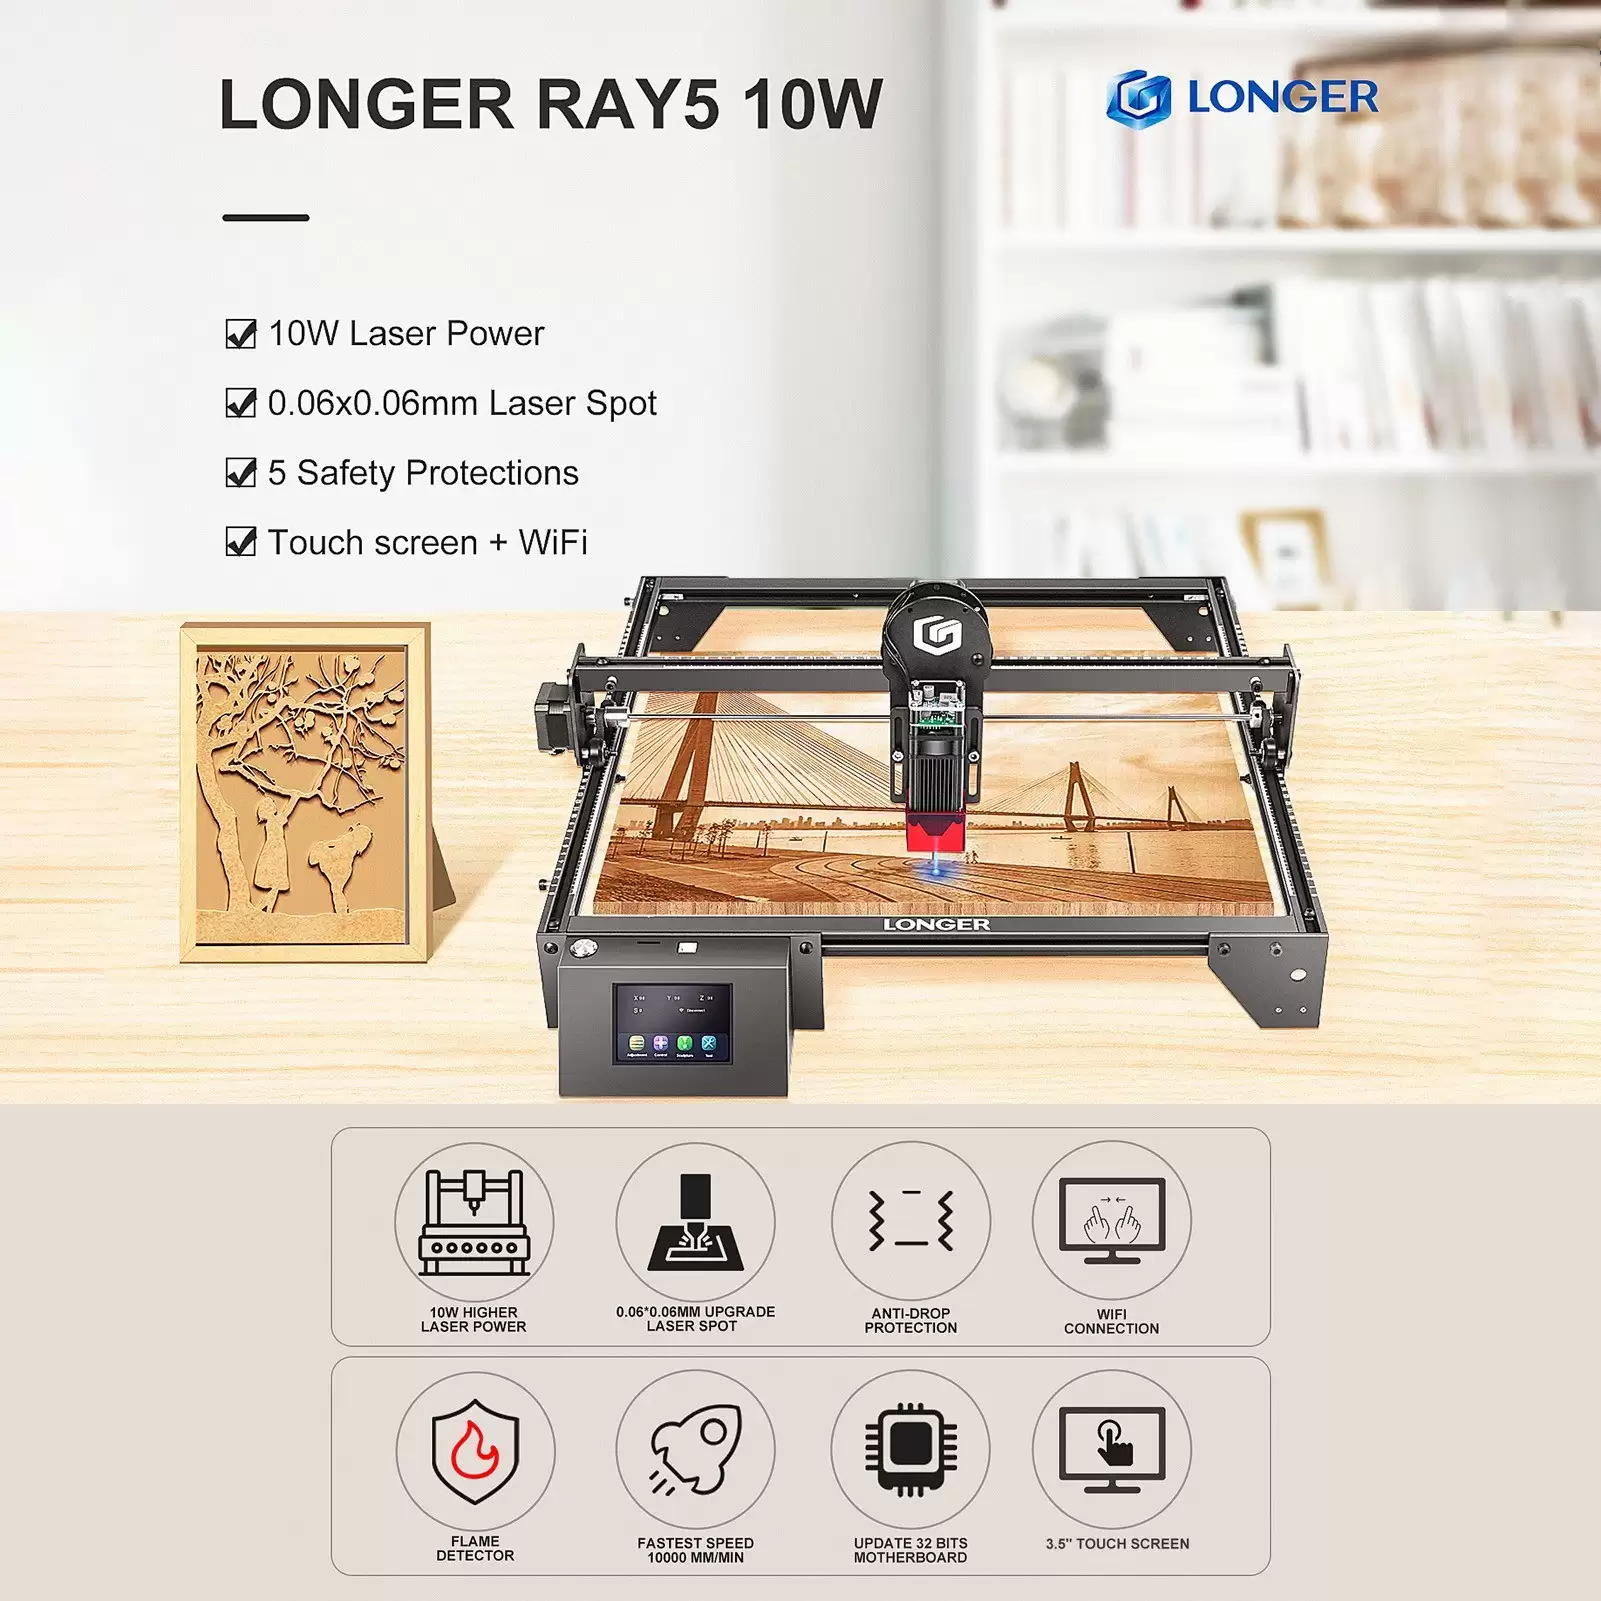 Order In Just €189 Longer Ray5 10w Laser Engraver With This Discount Coupon At Cafago